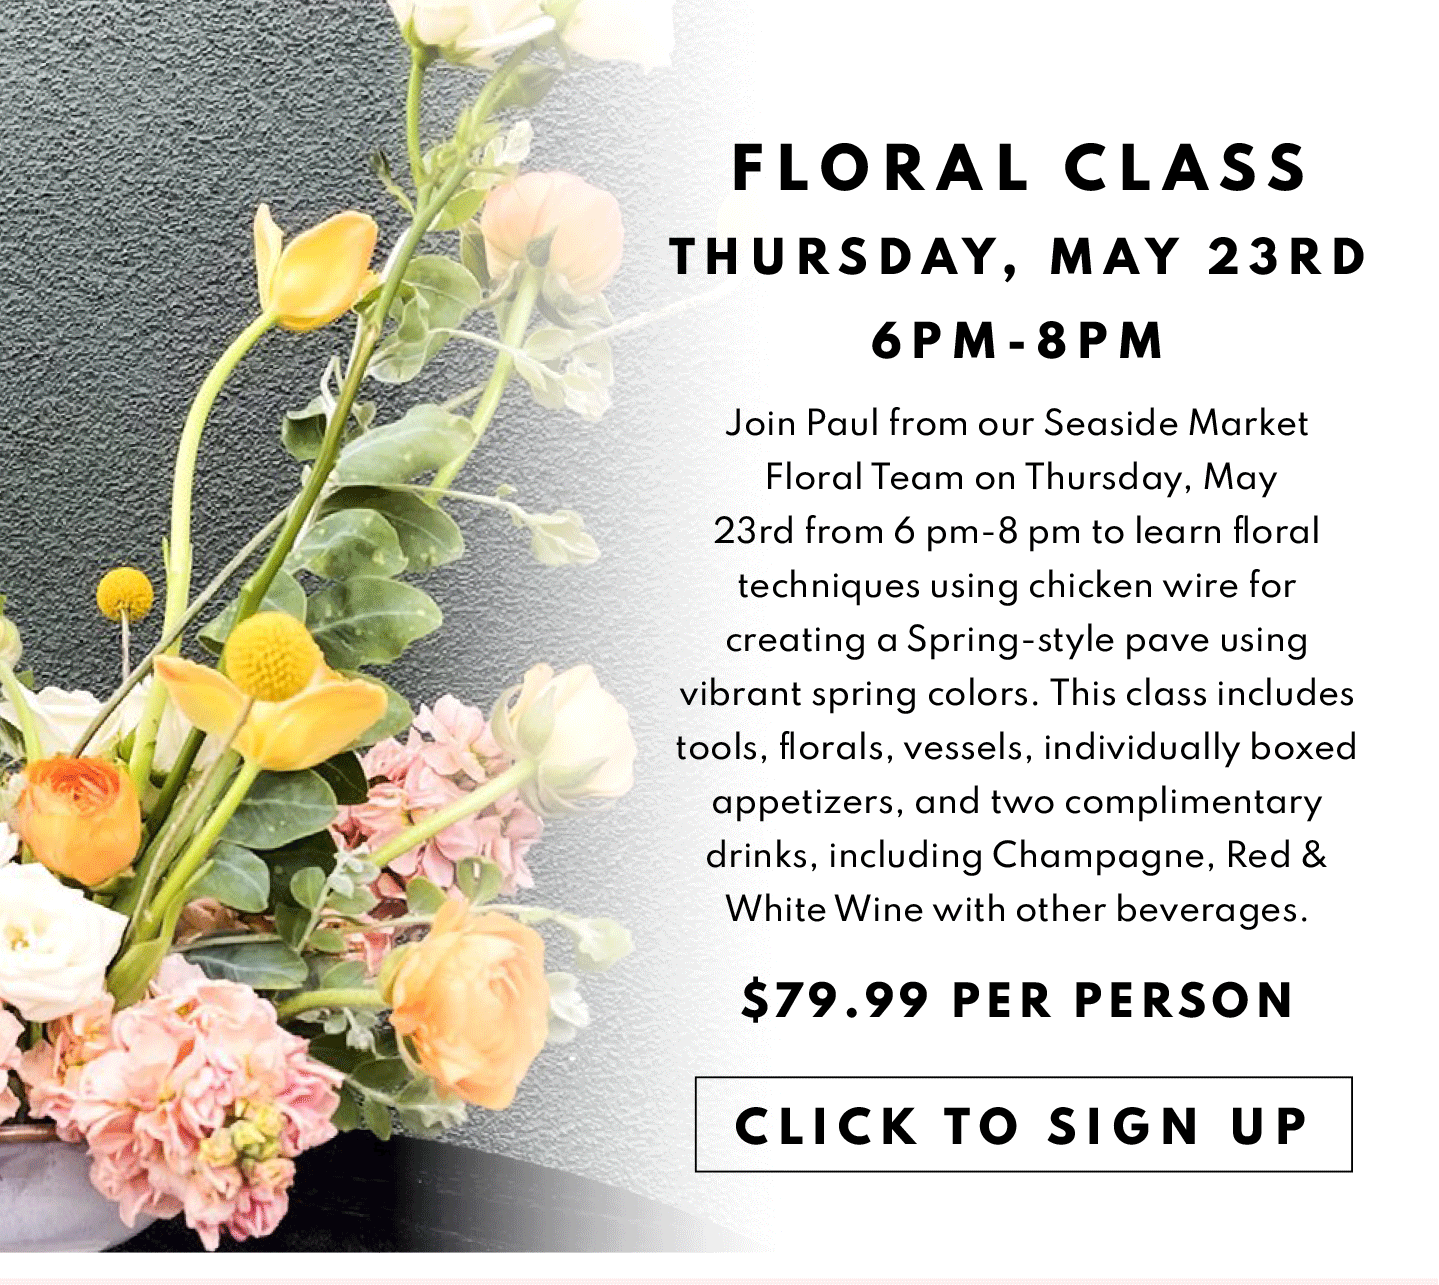 Adult FLoral Class - May 23rd, 6-8pm